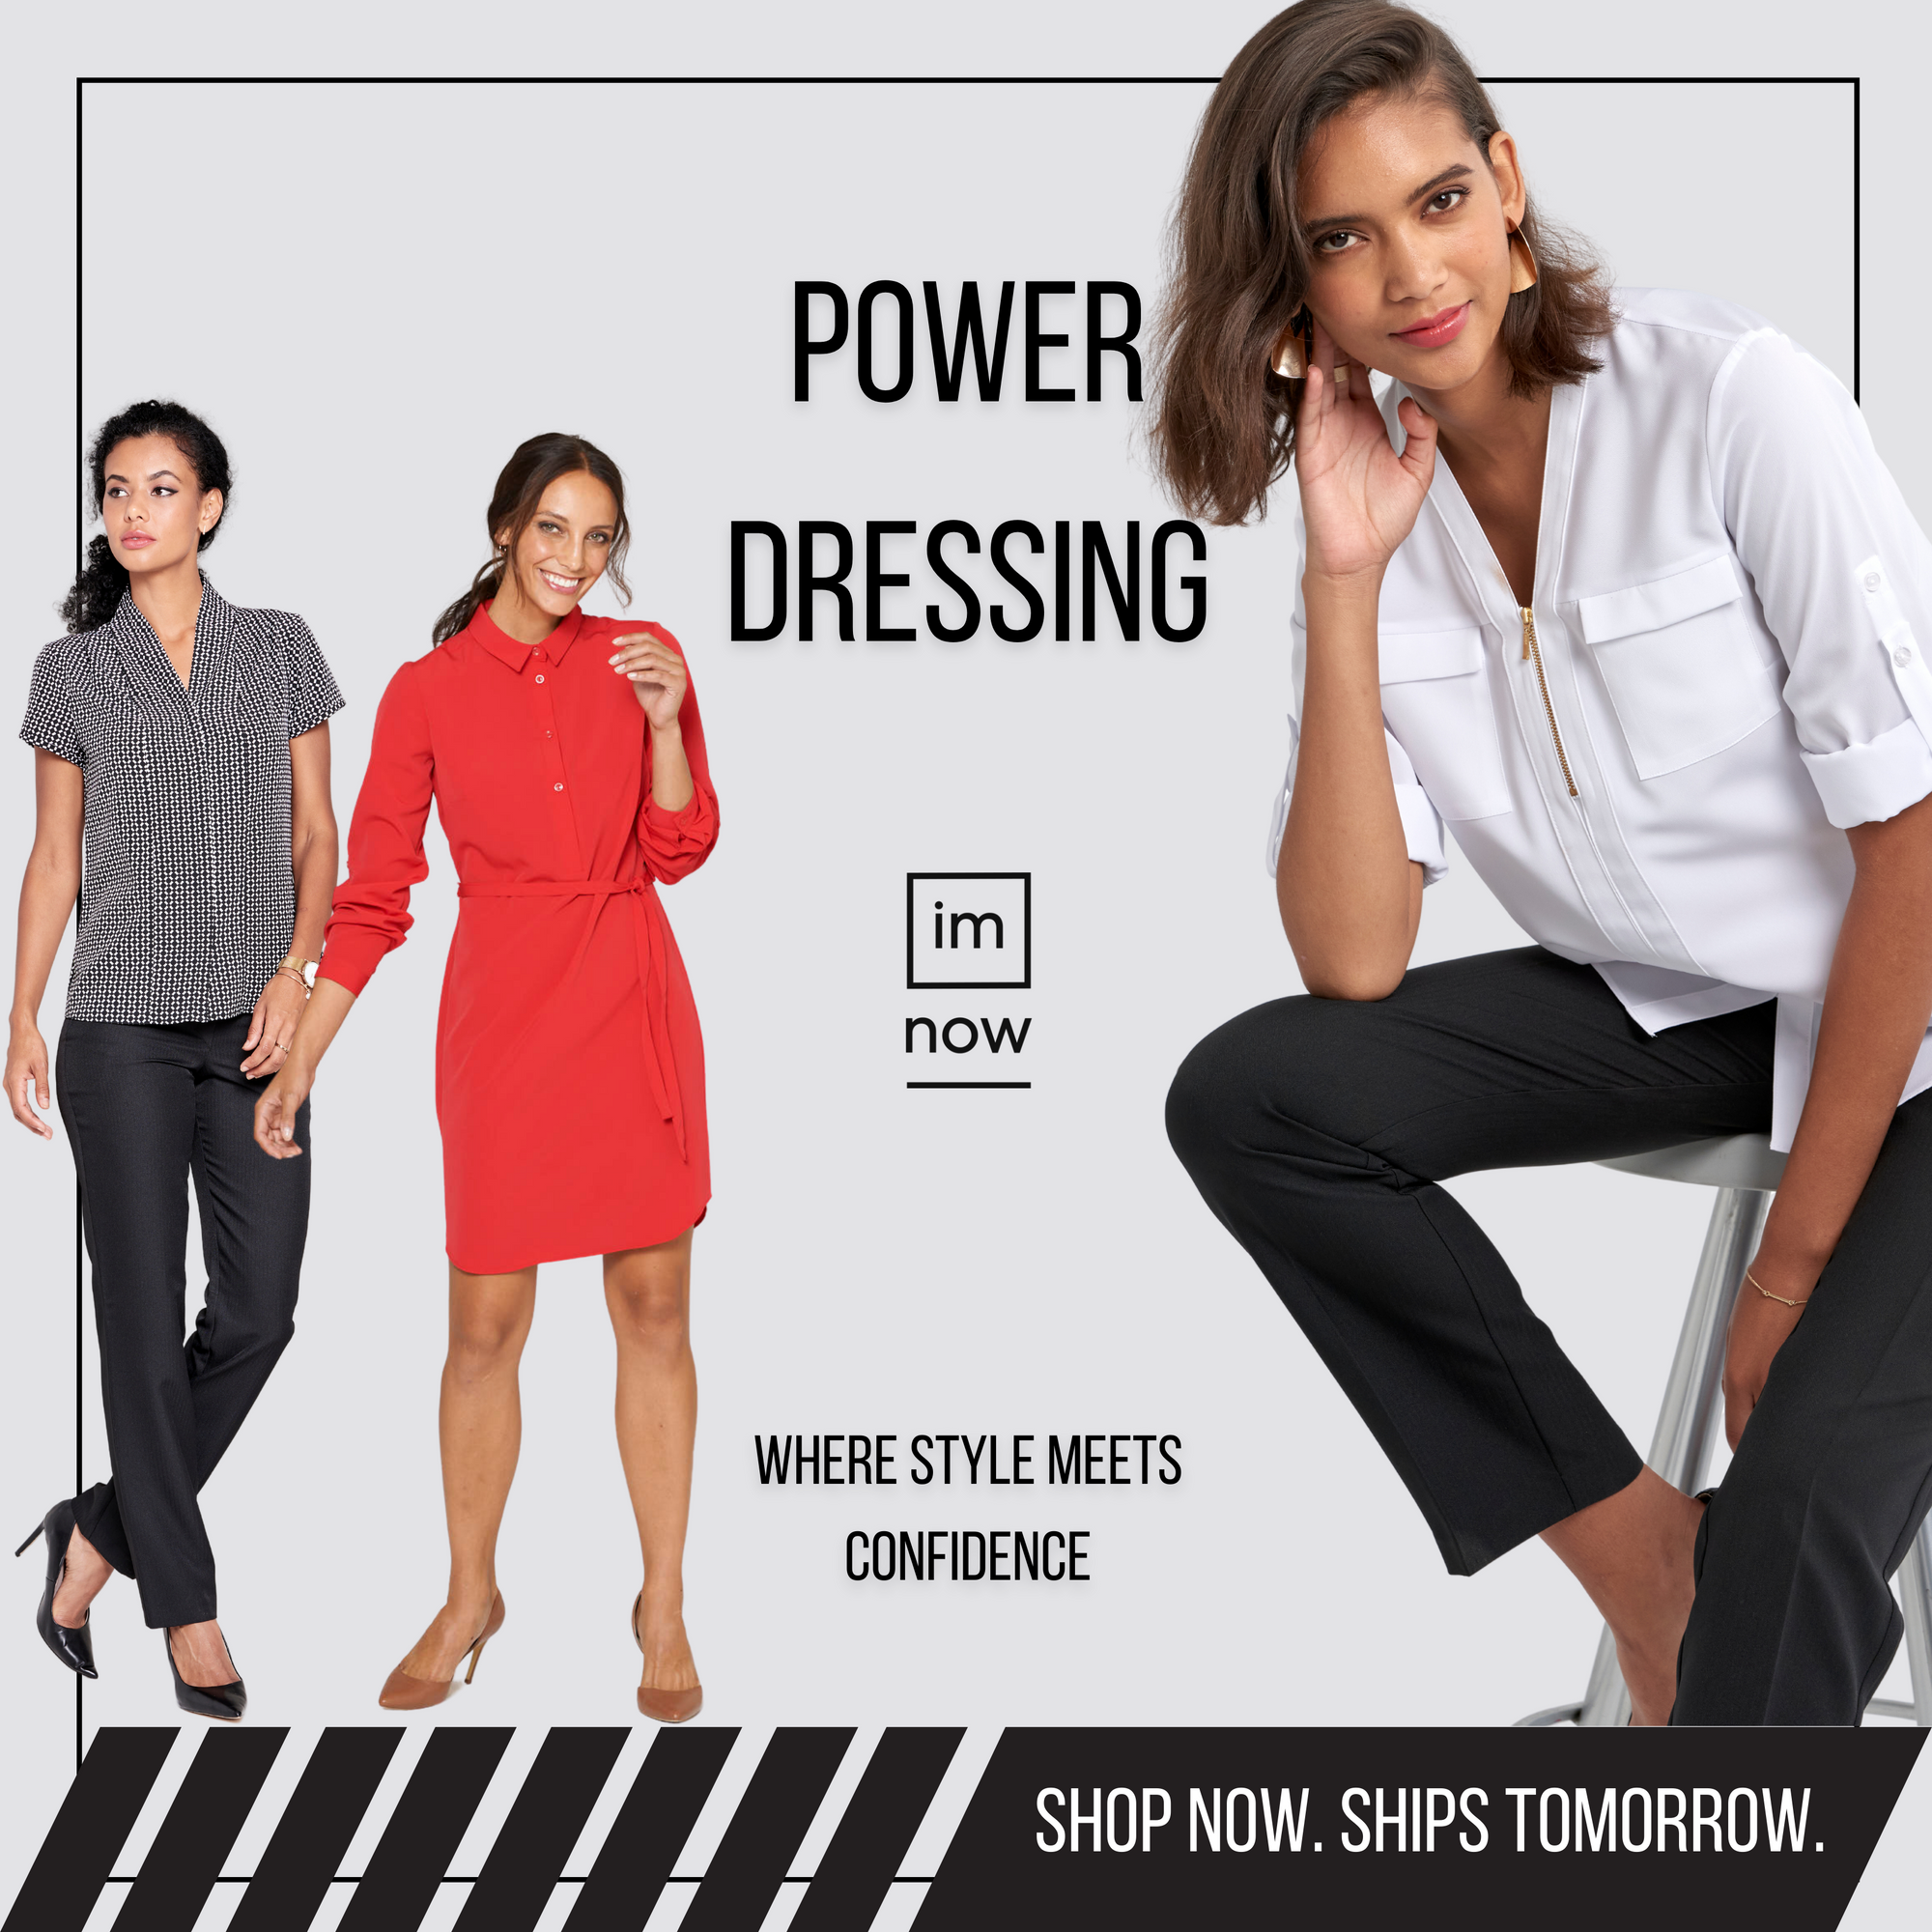 Power Dressing with ImNow | Where Style Meets Confidence!